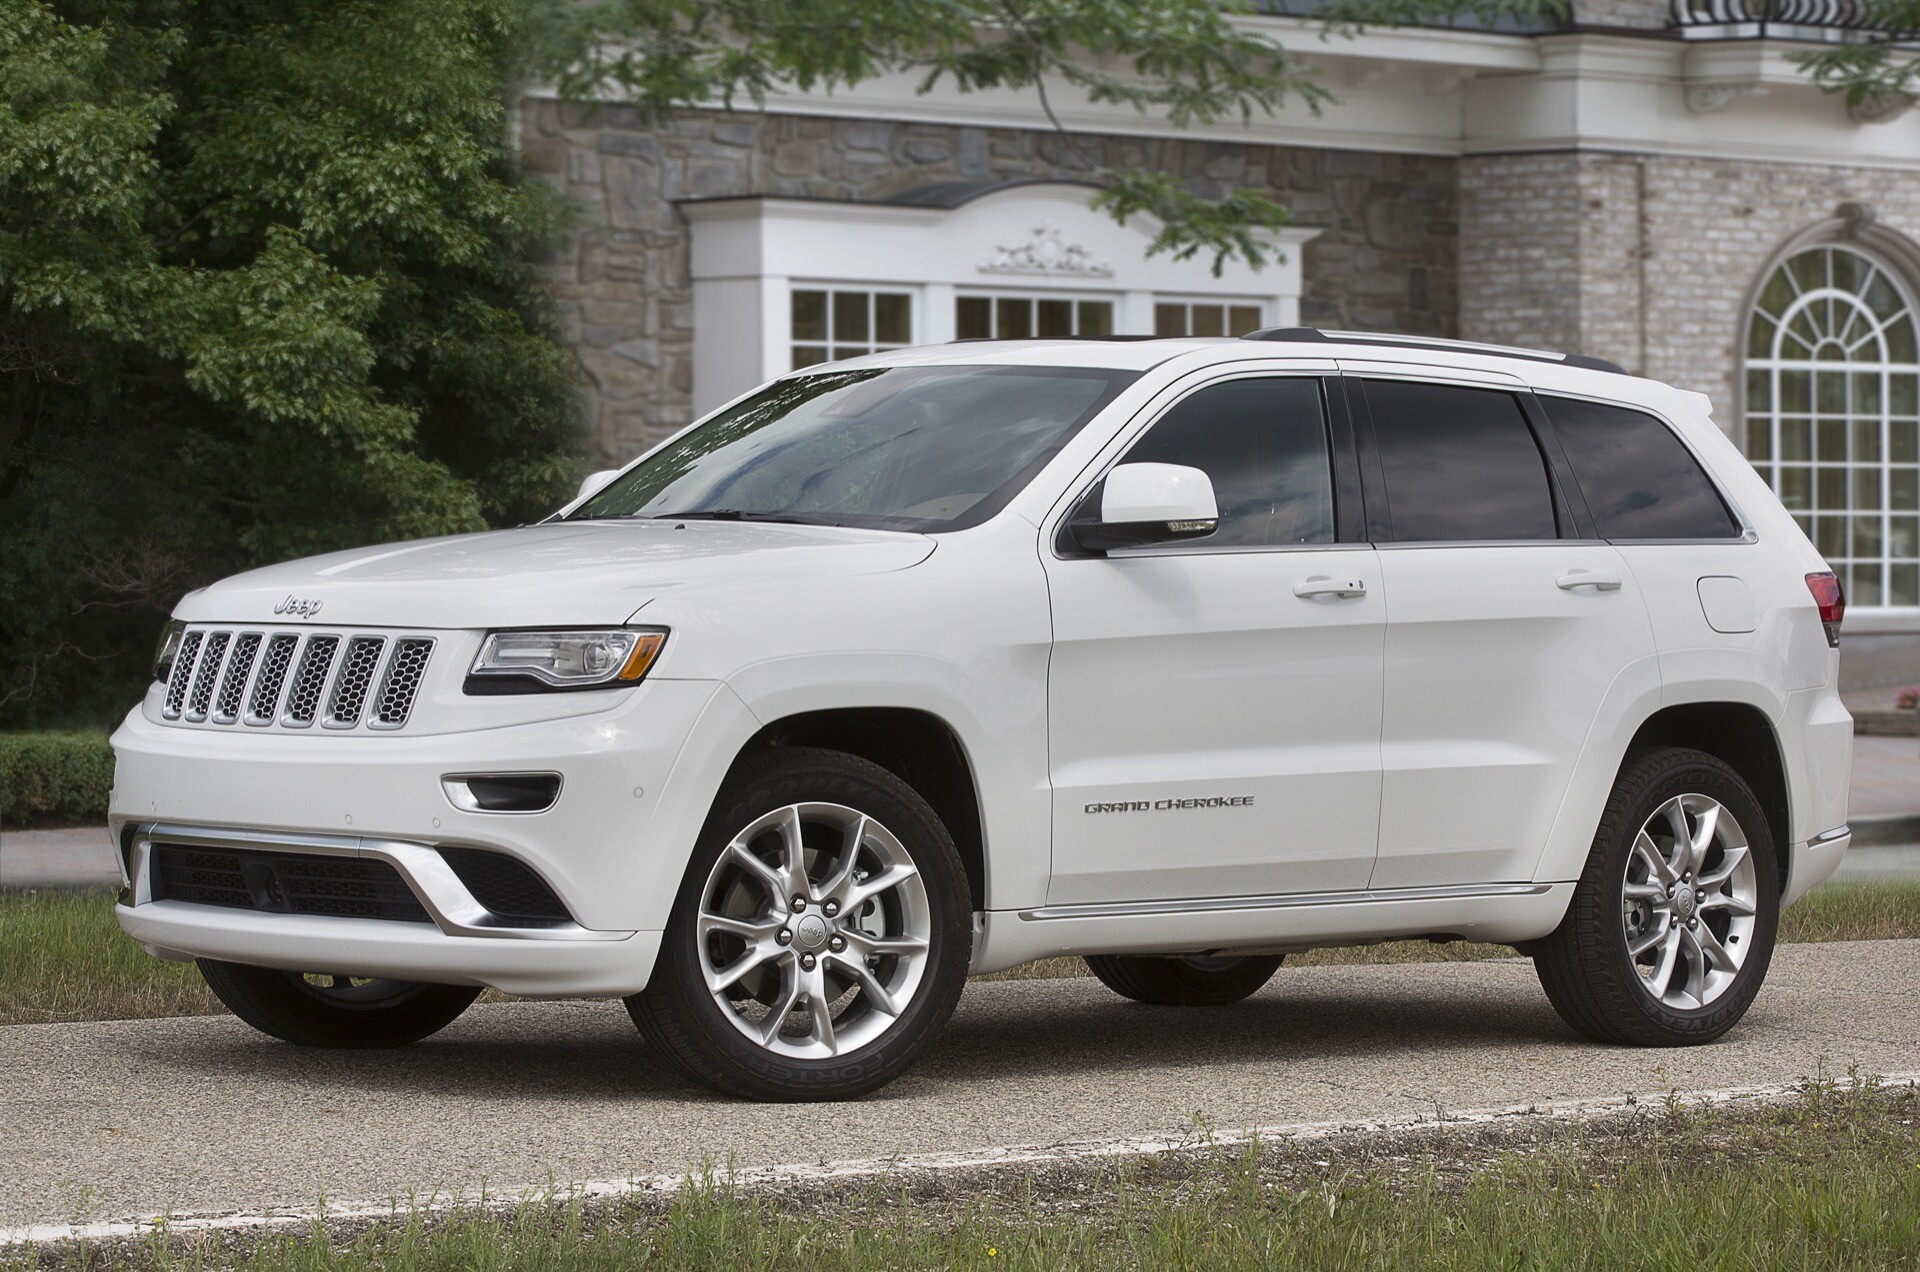 Jeep Grand Cherokee: Jeep's mid-size SUV model, Vehicles, A unibody chassis. 1920x1280 HD Background.